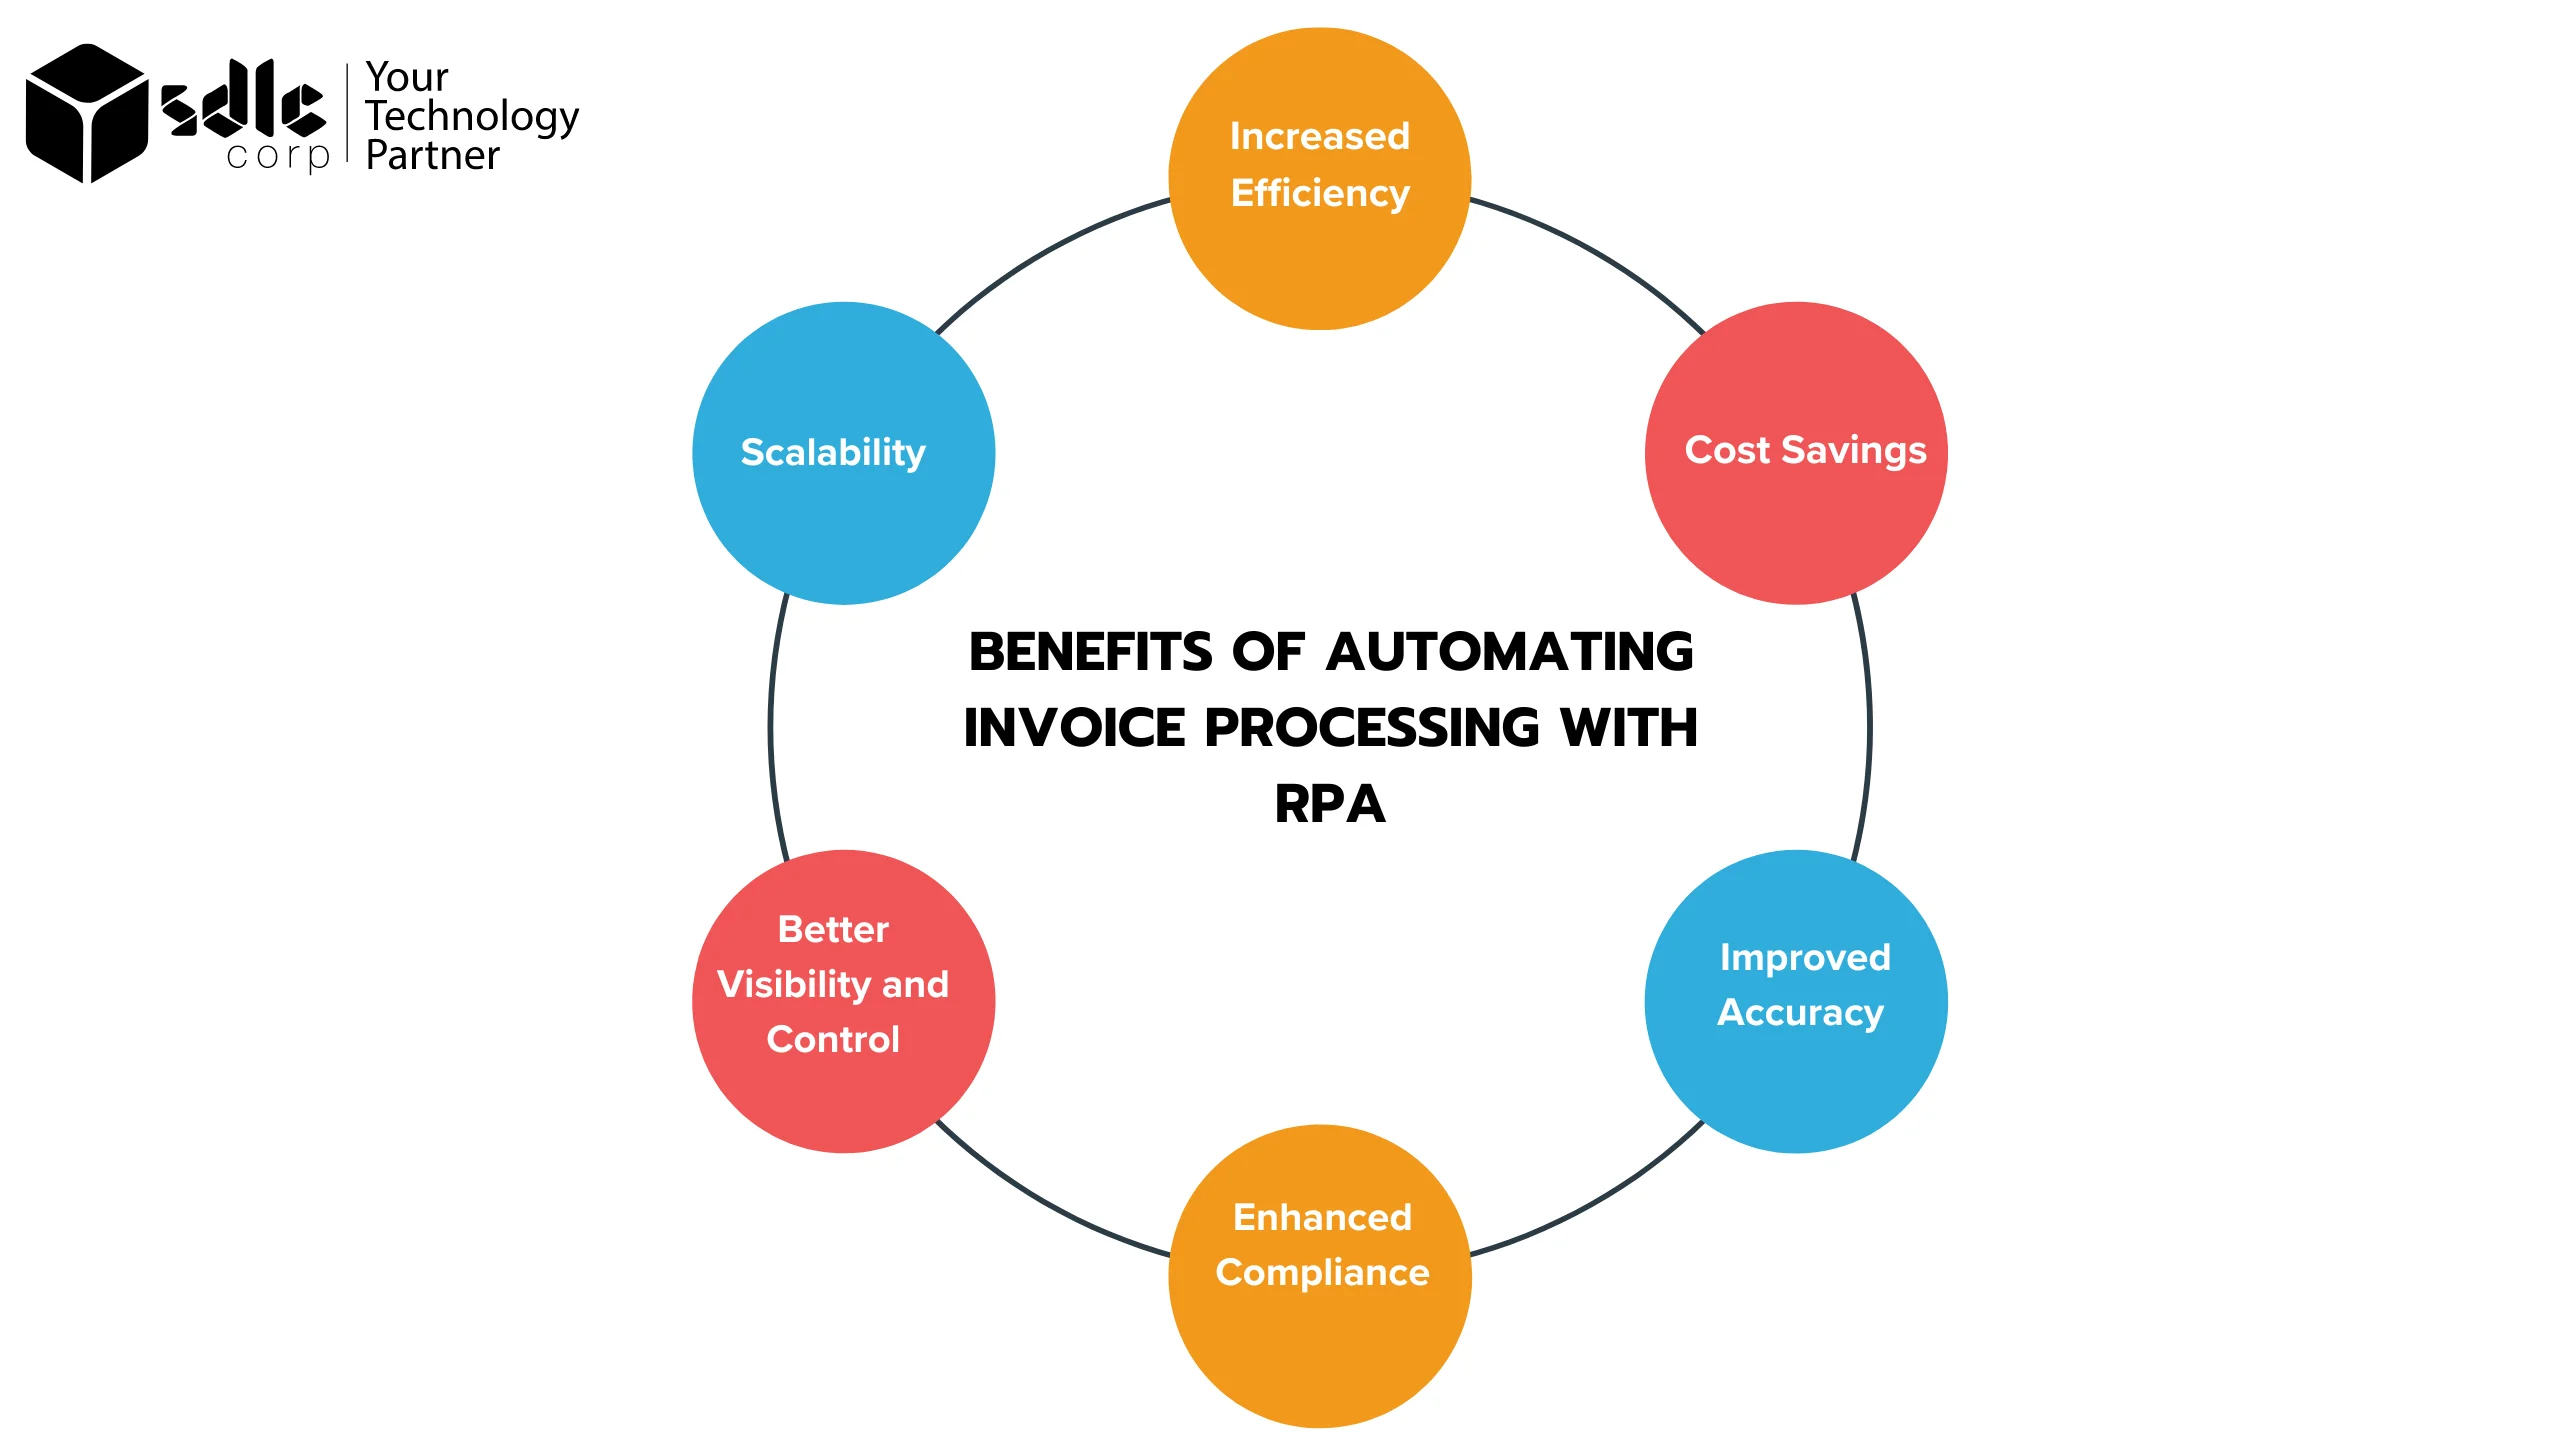 utomating invoice processing with RPA offers several benefits